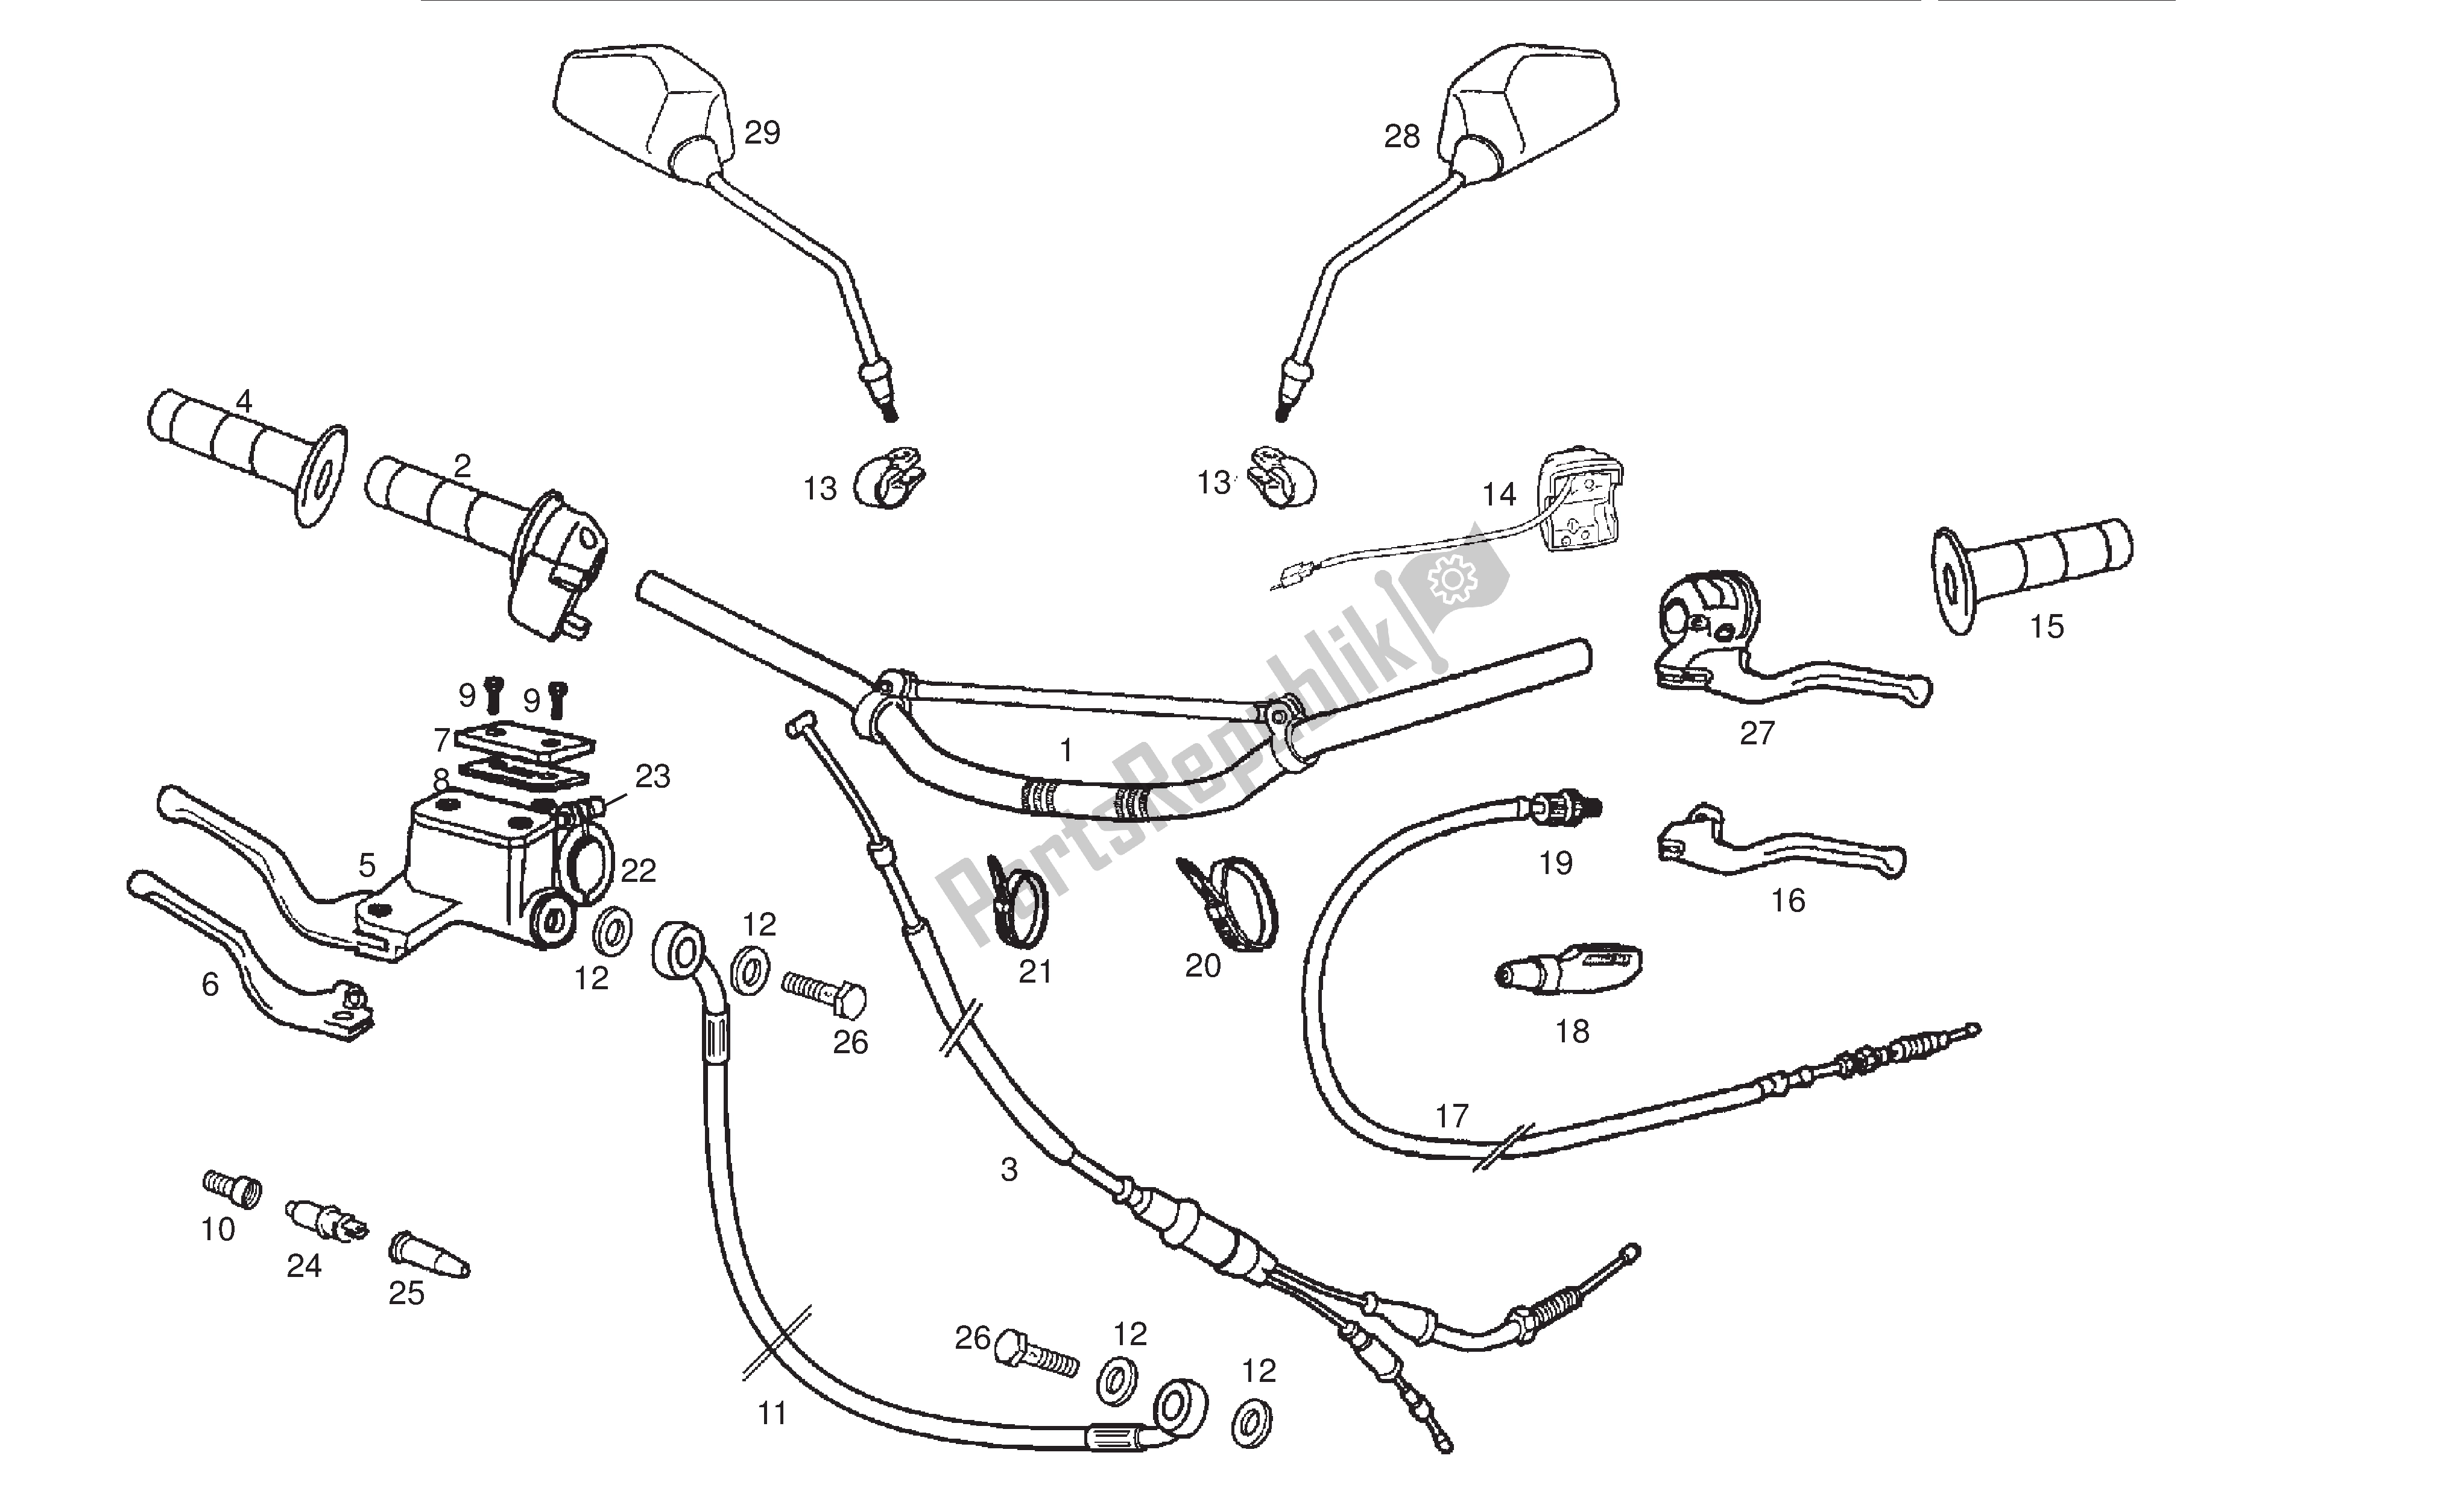 All parts for the Handlebar And Controls of the Derbi Senda DRD SM 50 2005 - 2008